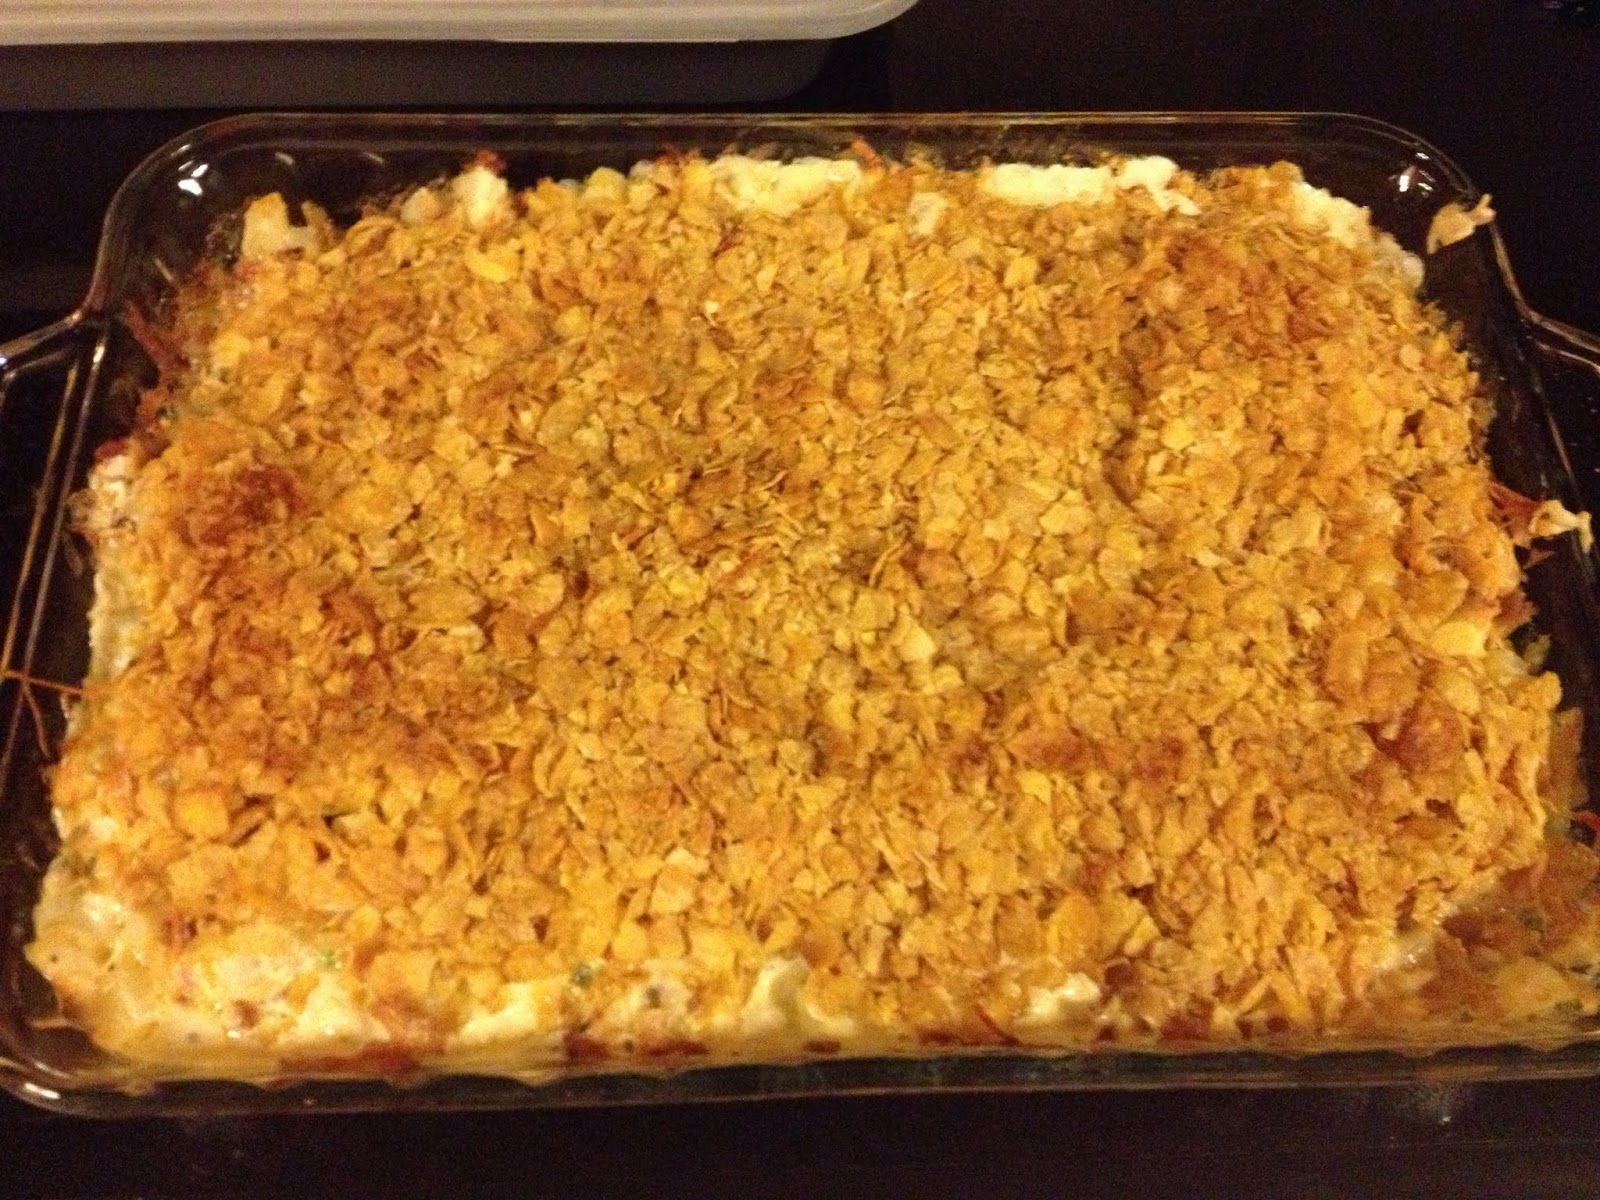 Knackish: Crafting, Cooking & Everything in Between: Corn Flake Potato Casserole